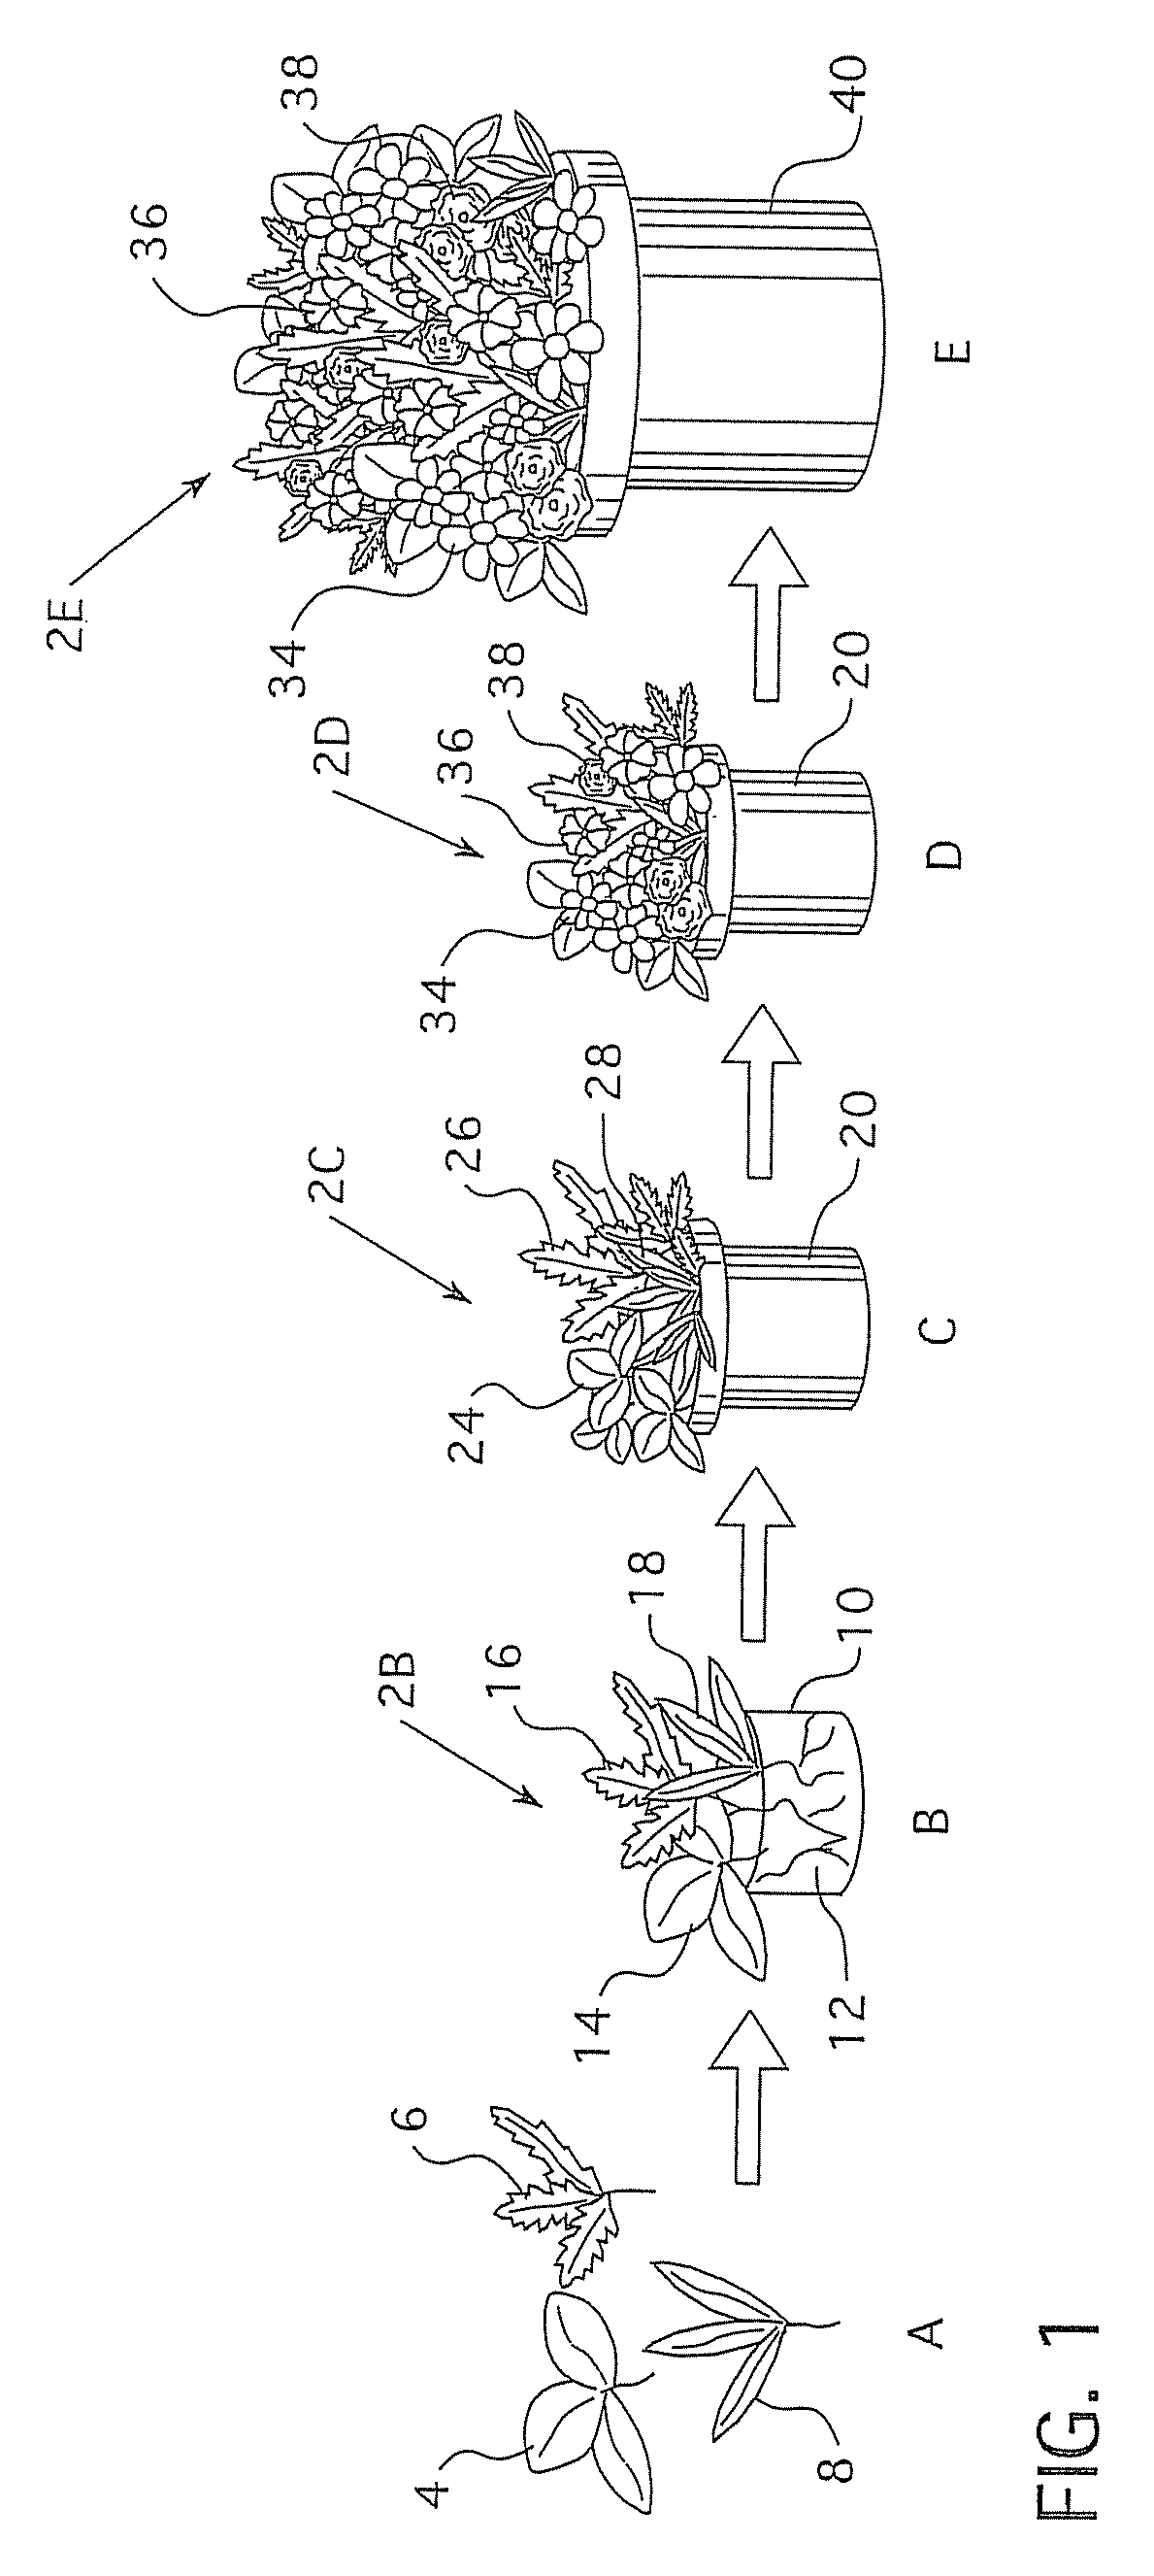 Method of producing a horticultural display